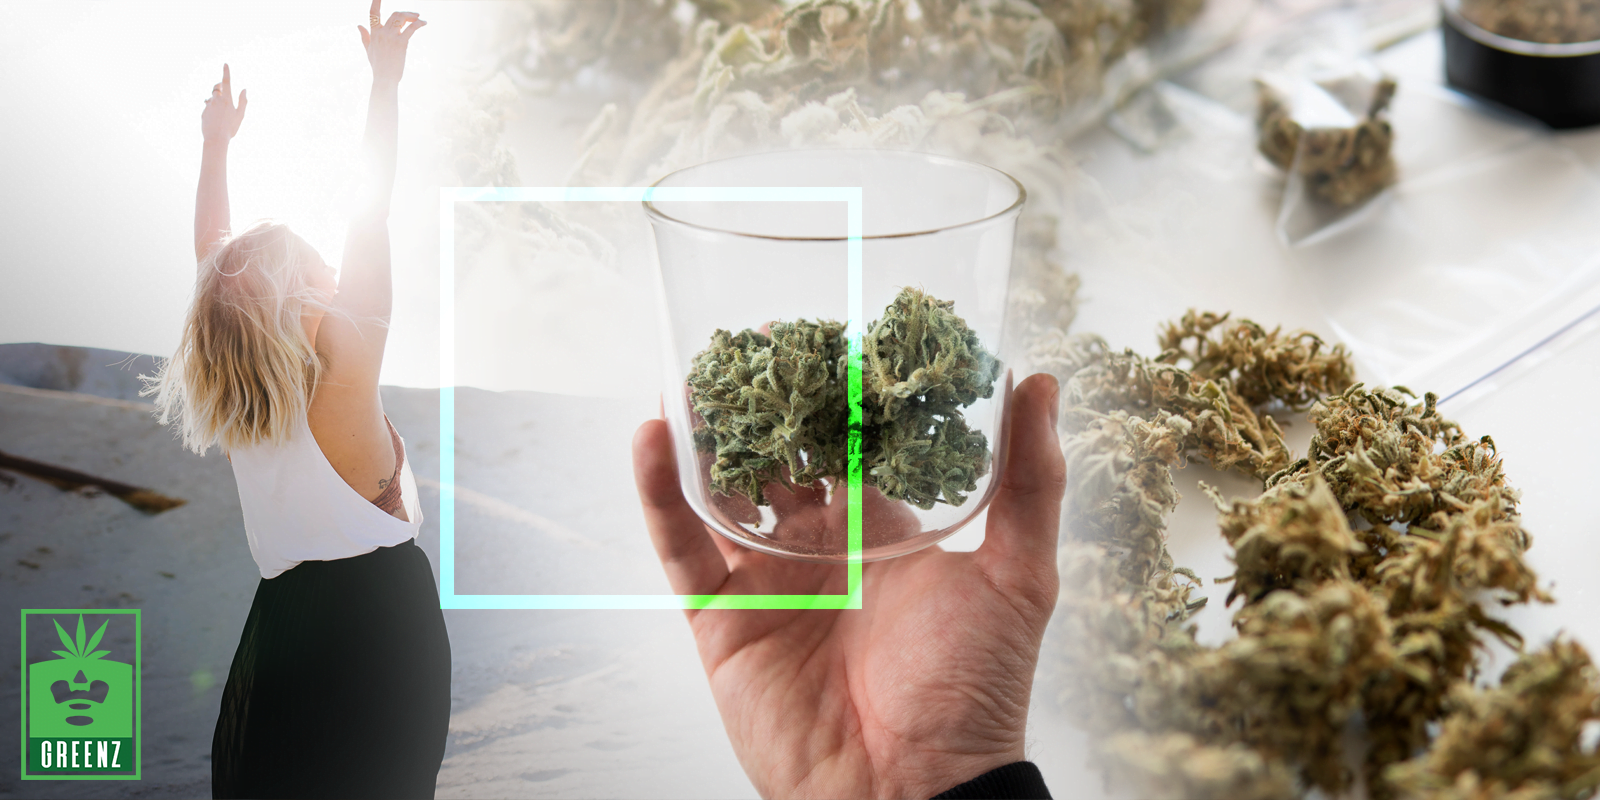 The Top 5 Latest Trends In Cannabis – Research, Users & Products